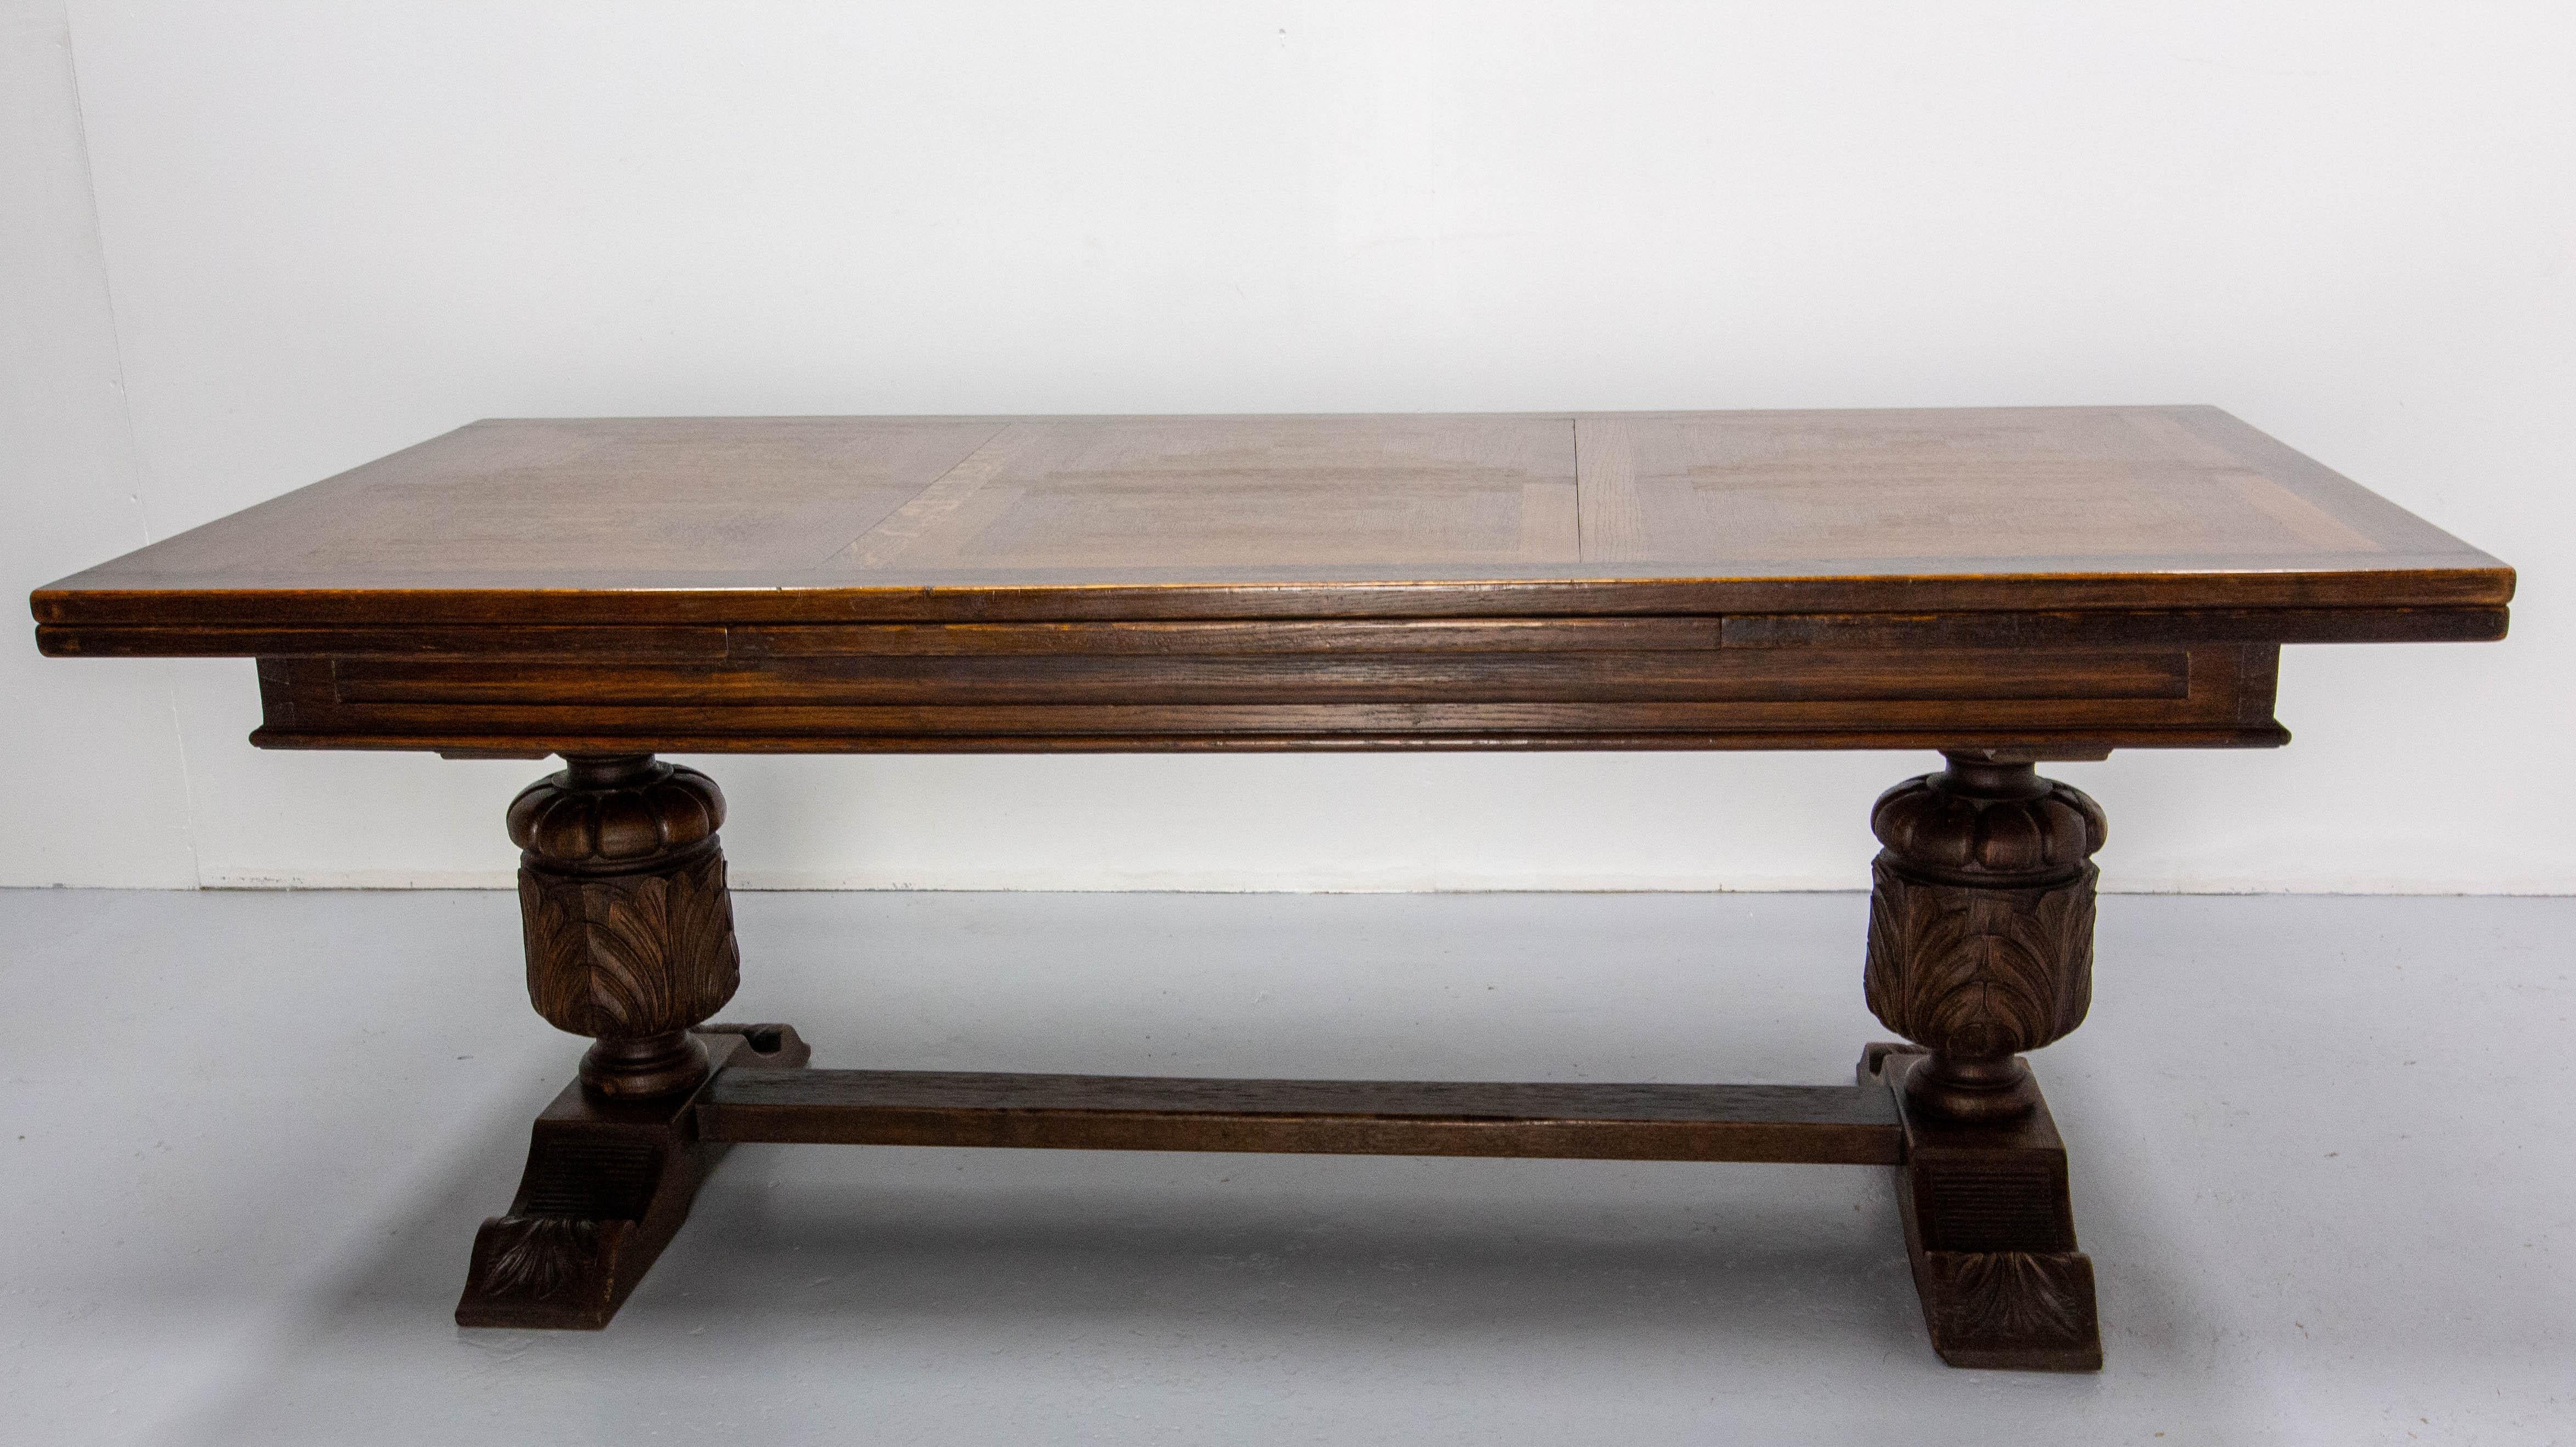 French Spanish Basque Renaissance Revival dining table 1960
Carved oak solid wood. The table top is decorated in a checkerboard pattern thanks to a play on the direction of the wood.
With the extensions the size of the table increases from 78.74 in.